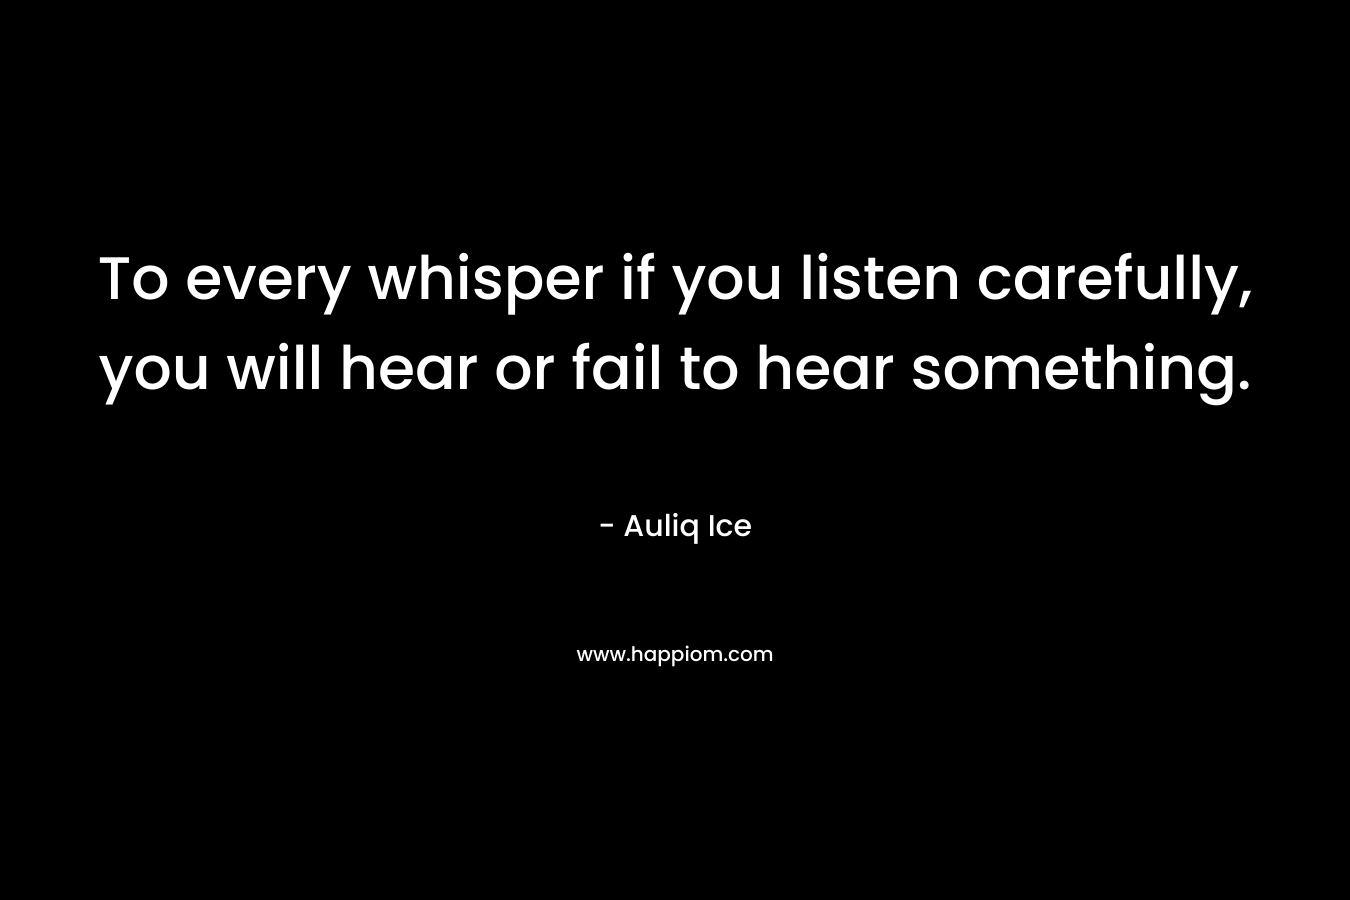 To every whisper if you listen carefully, you will hear or fail to hear something.